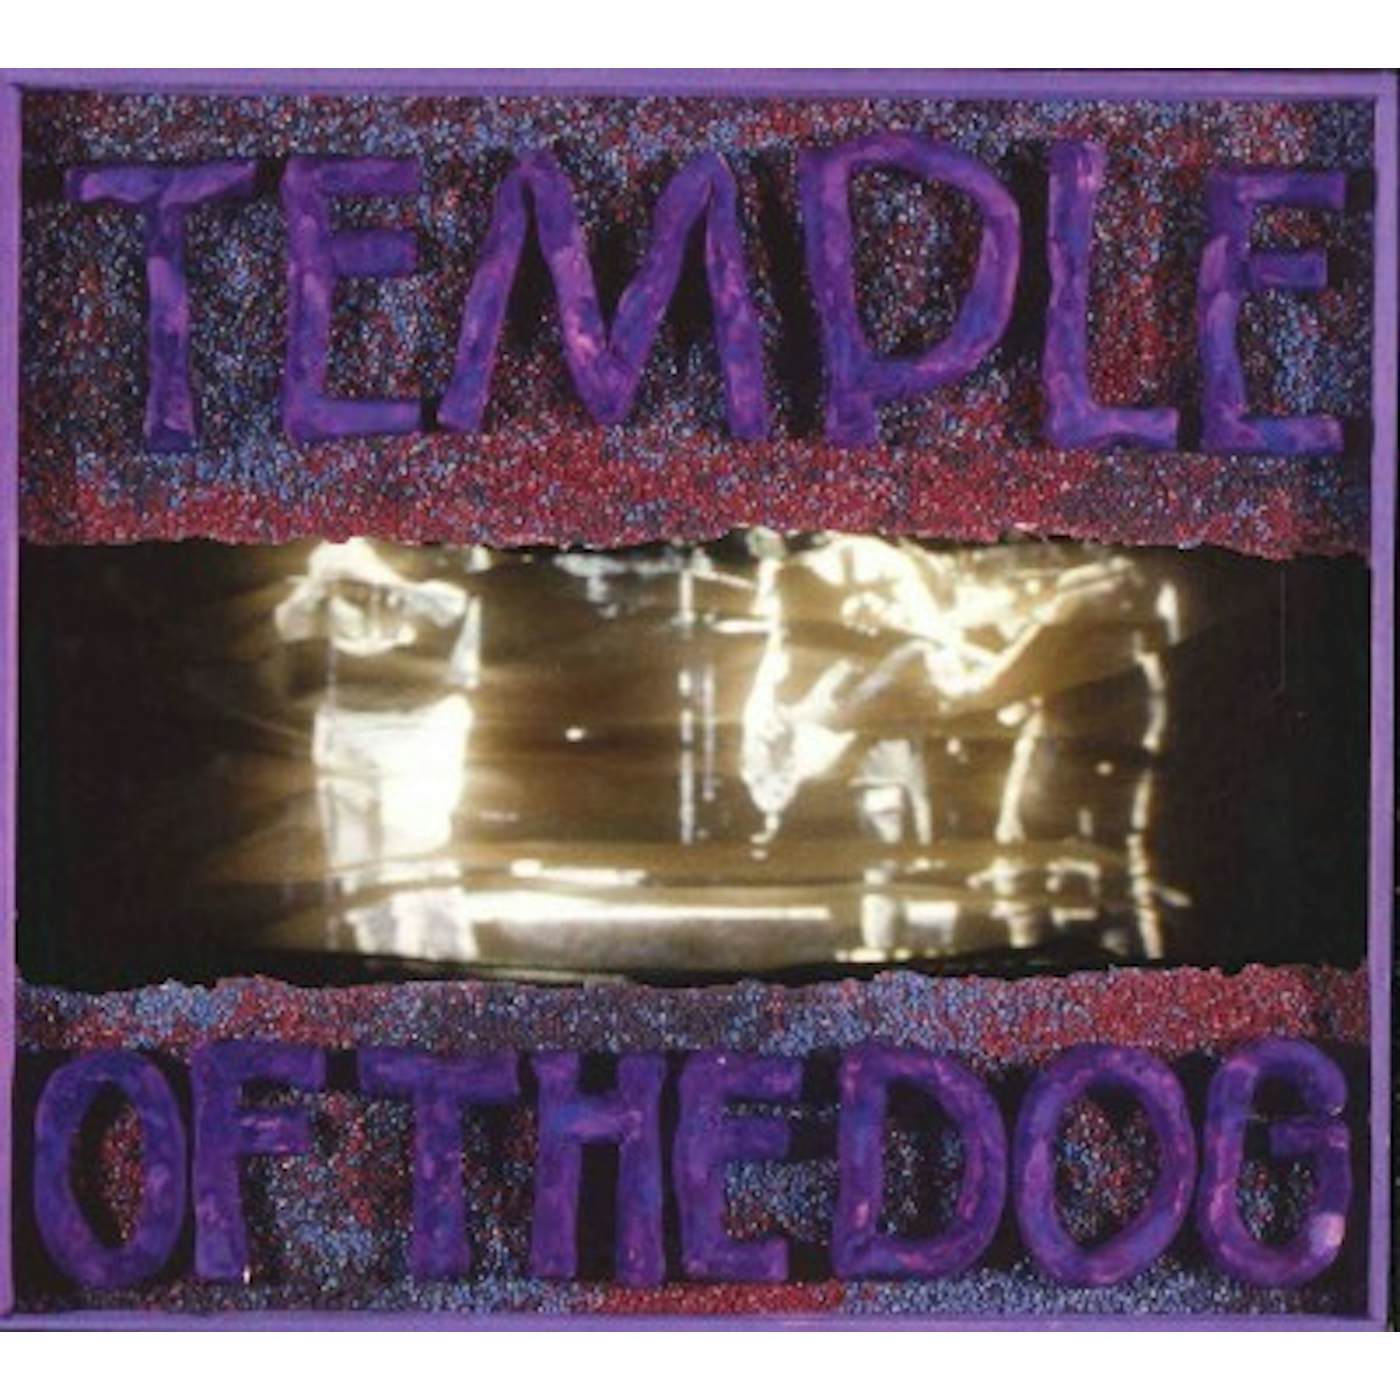 TEMPLE OF THE DOG (DELUXE EDITION) CD